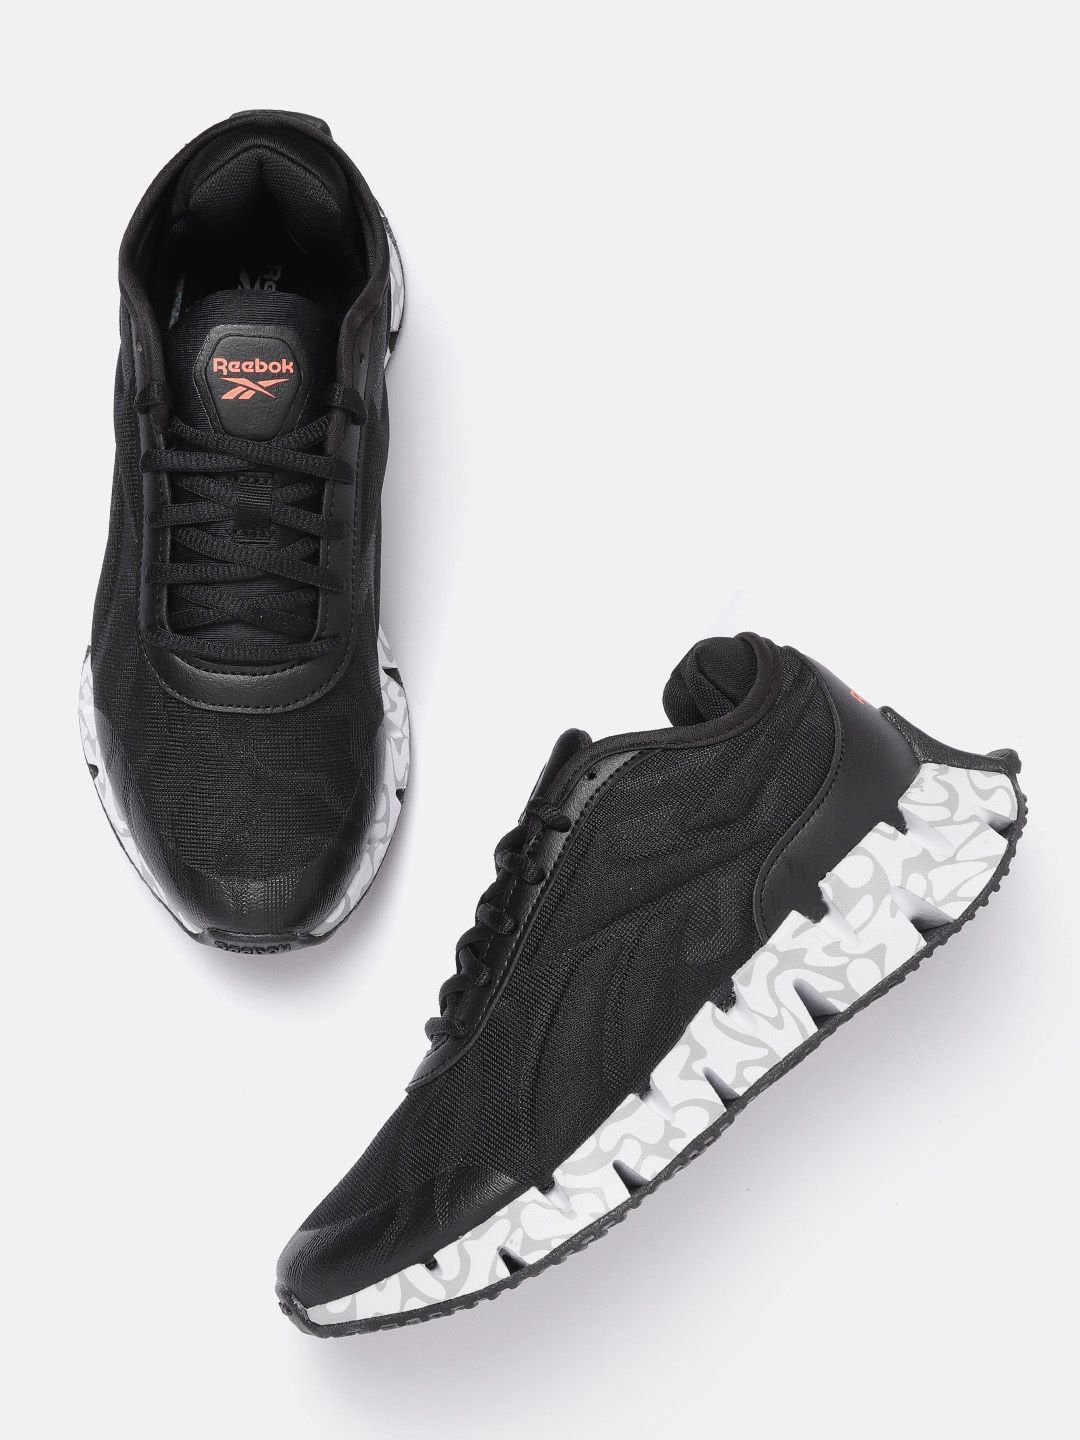 Reebok Women Black Woven Design Zig Dynamica 3.0 Running Shoes Price in India